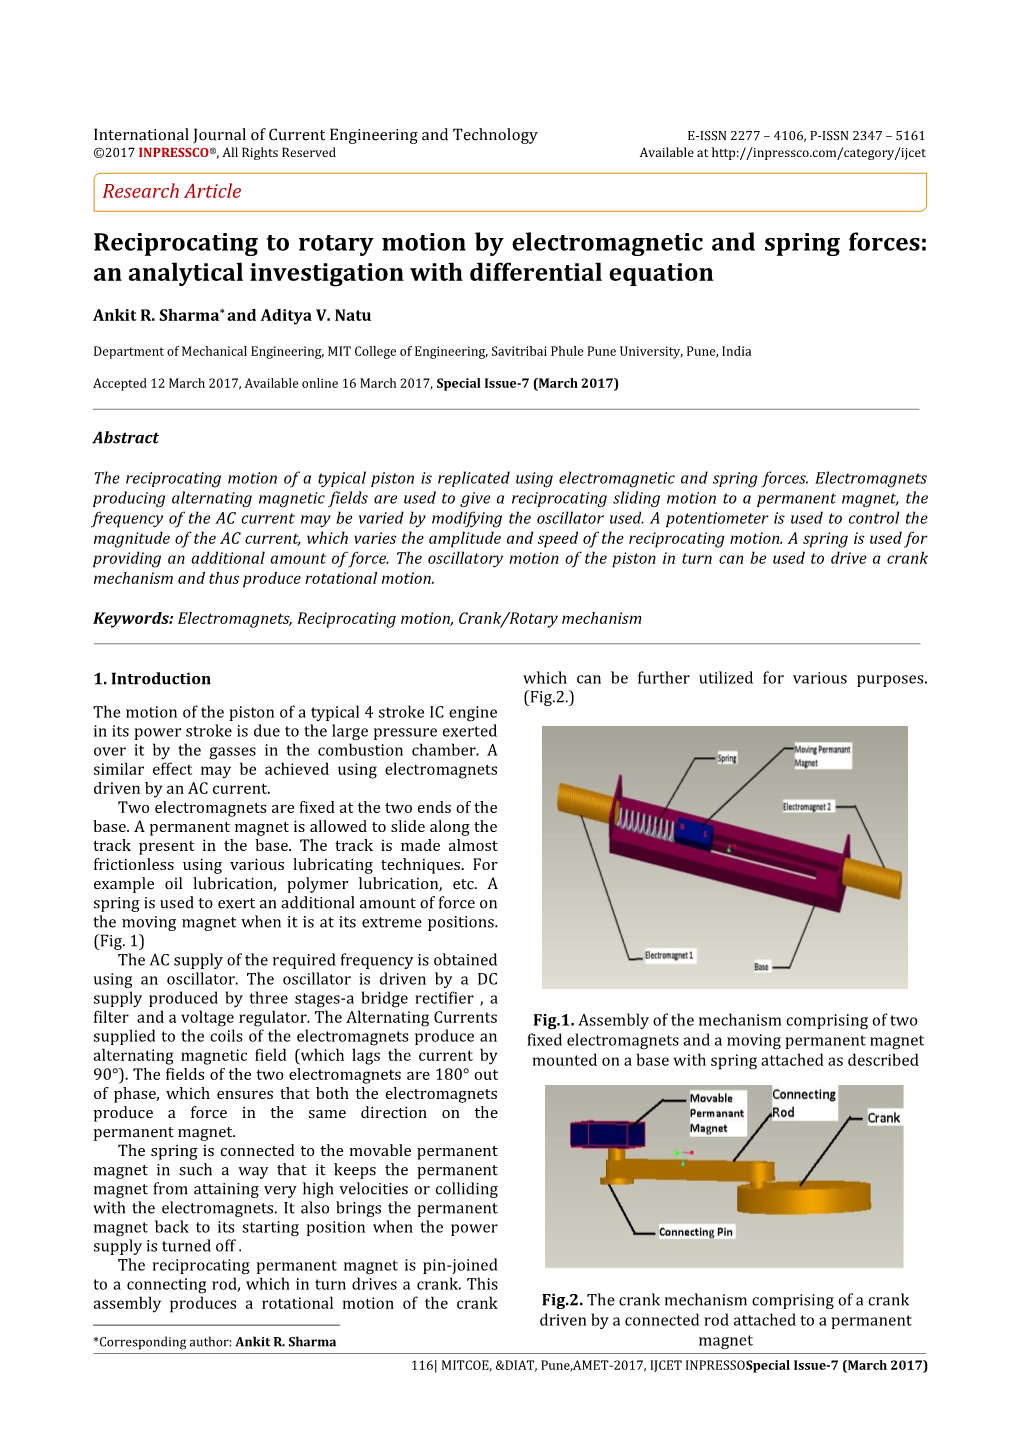 Reciprocating to Rotary Motion by Electromagnetic and Spring Forces: an Analytical Investigation with Differential Equation